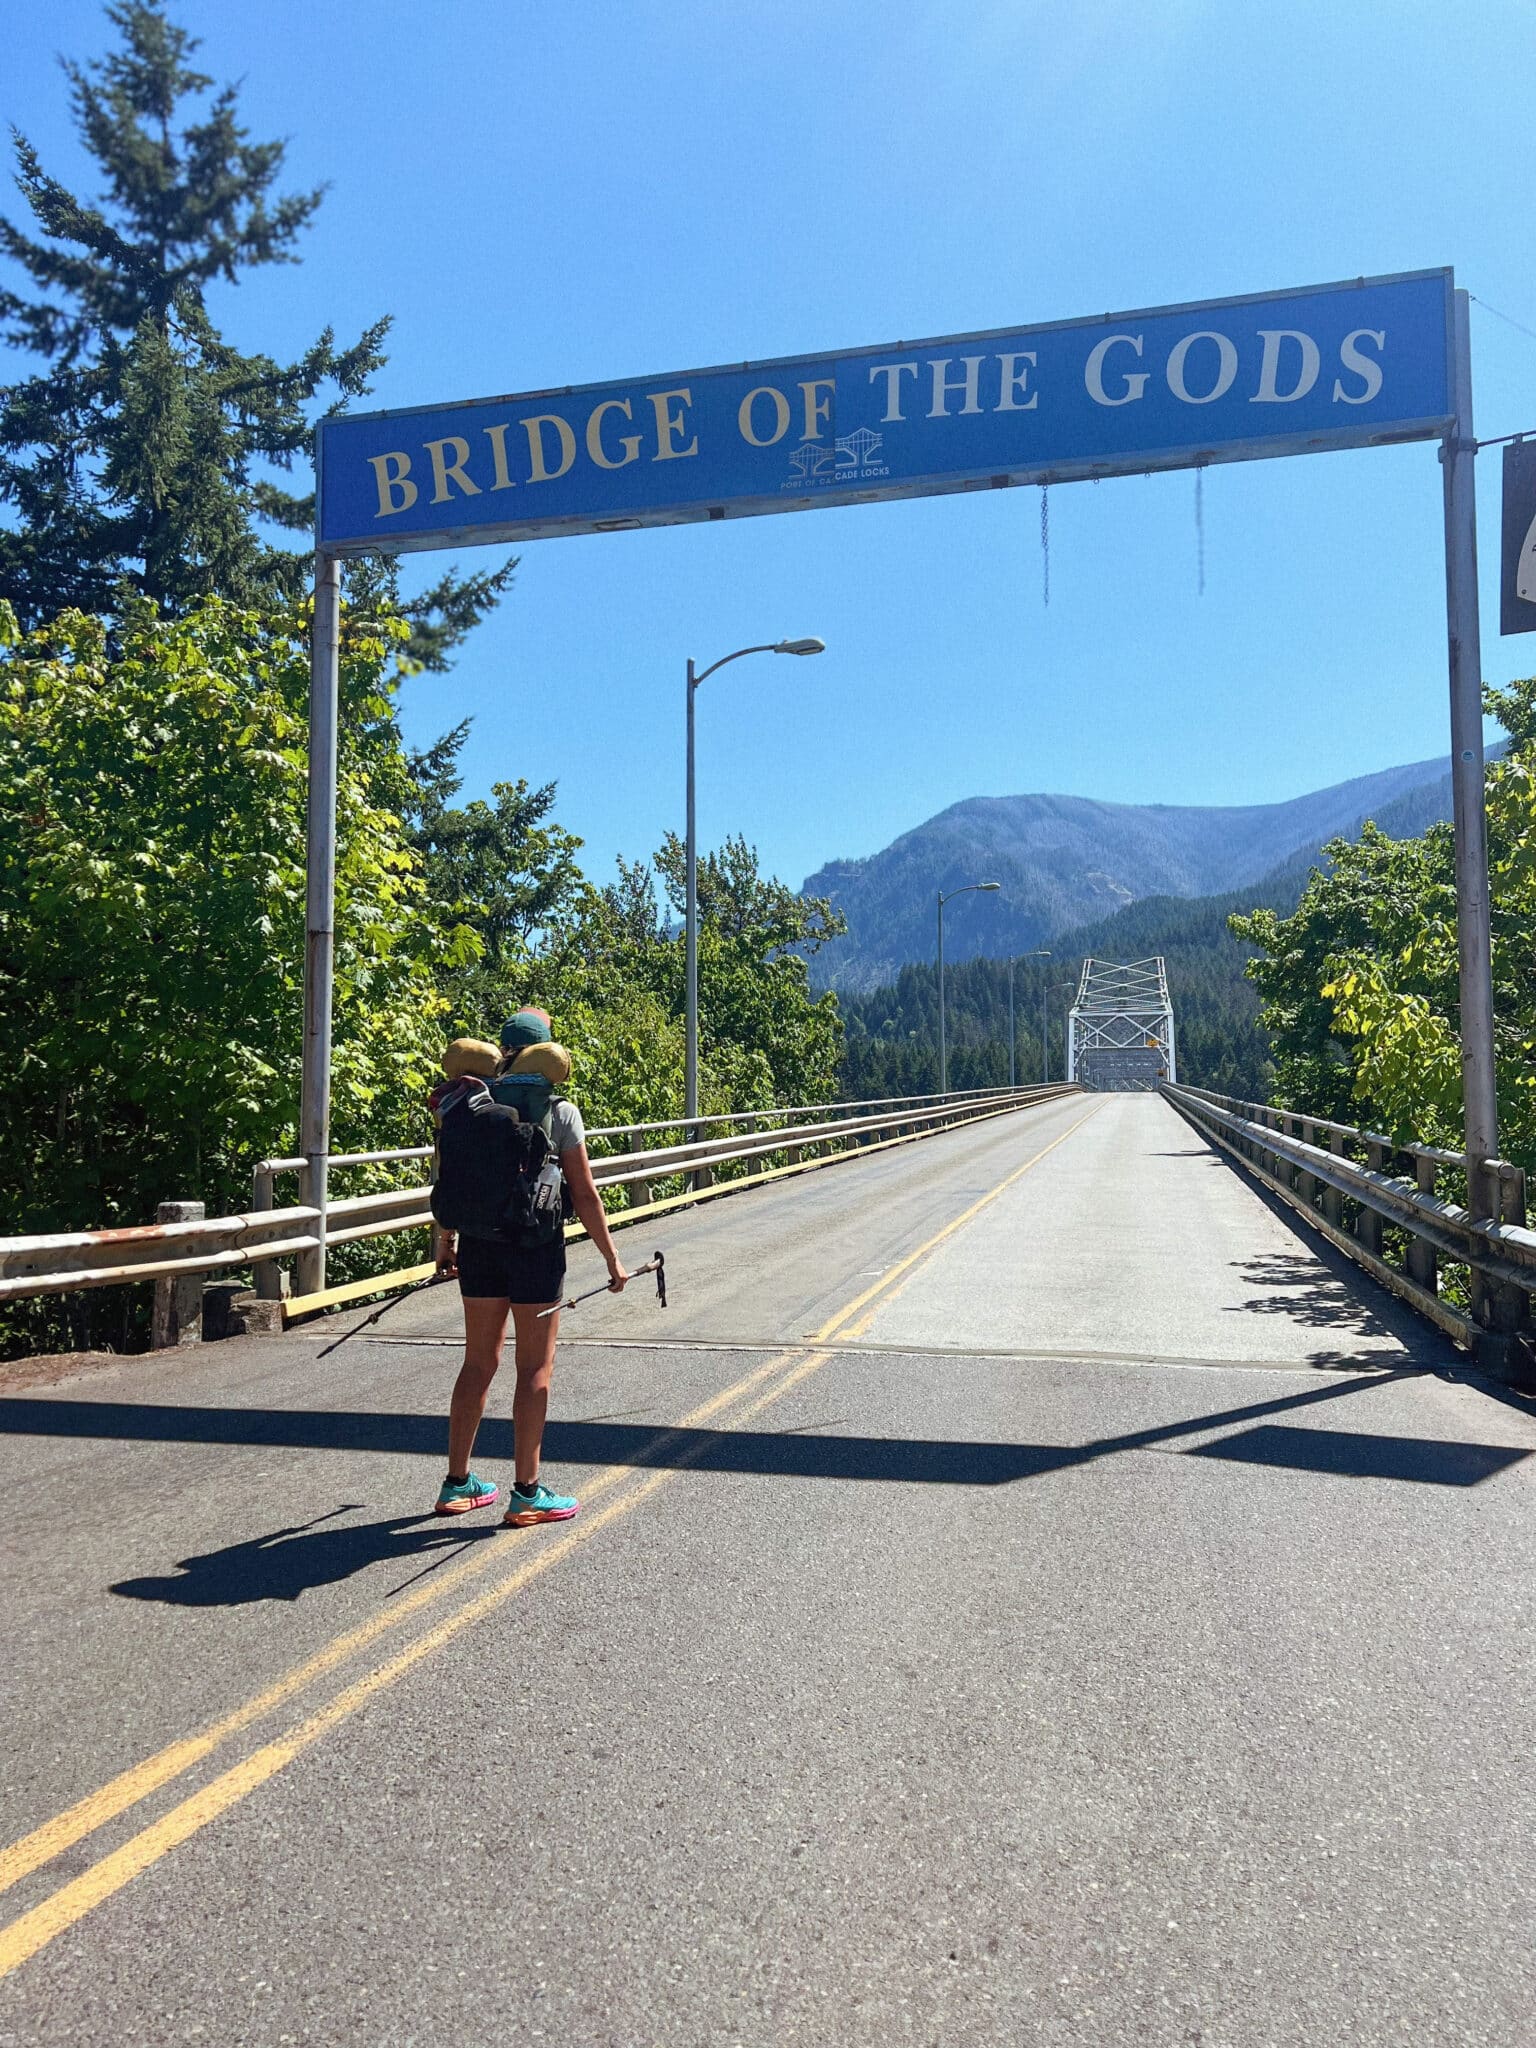 PCT Hiker at the beginning of the Bridge of the Gods in Cascade Locks, OR.